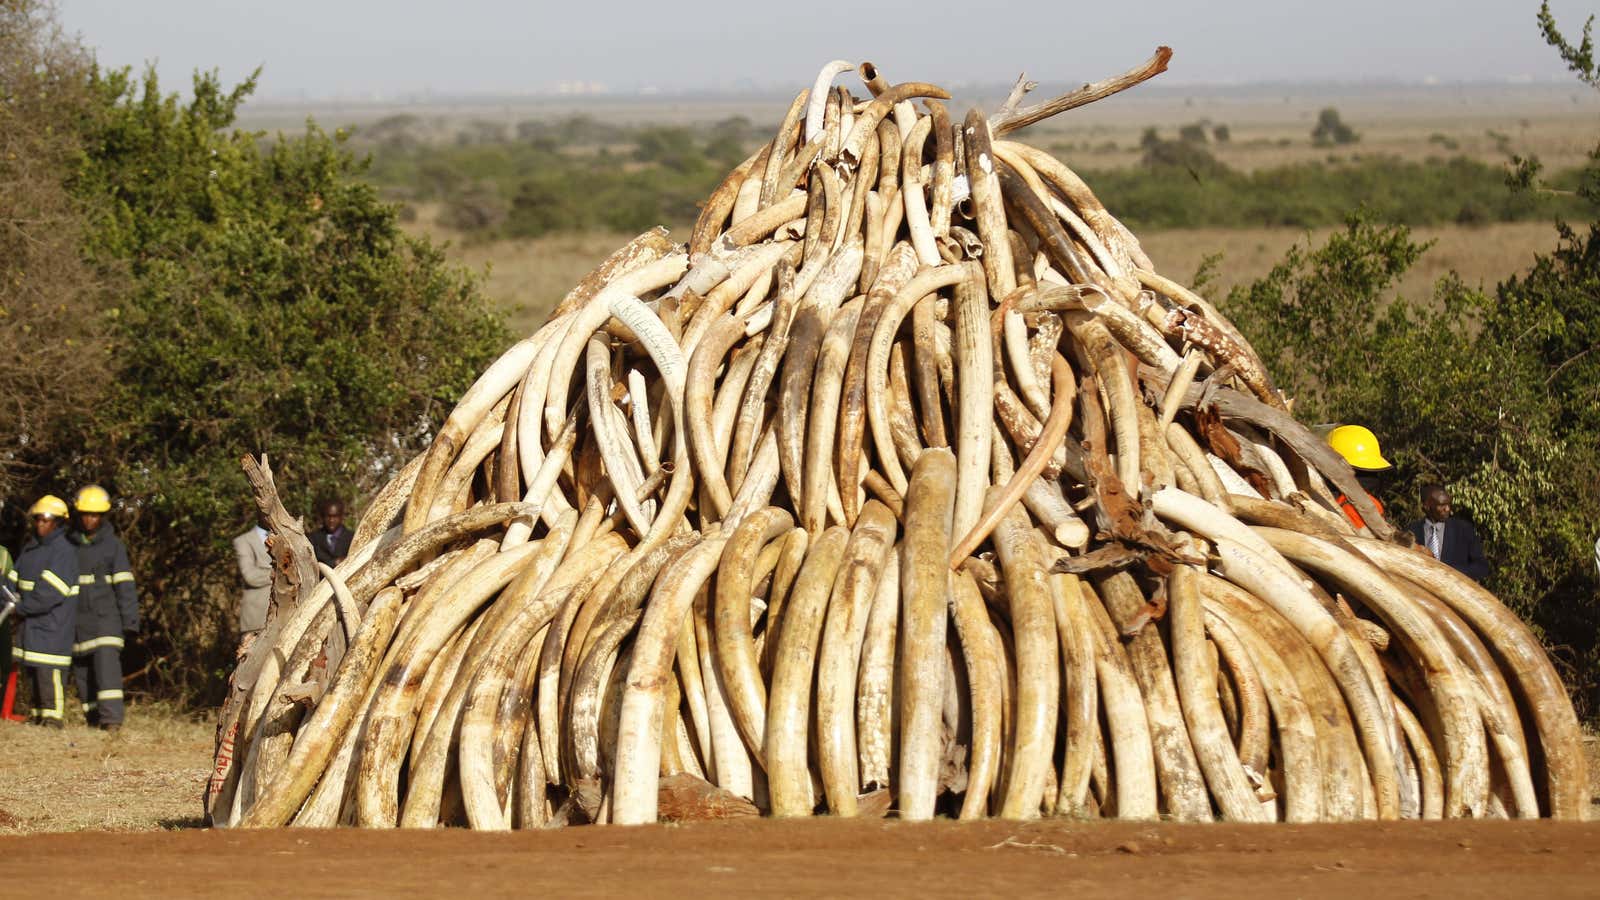 Each pair of tusks is one dead elephant.